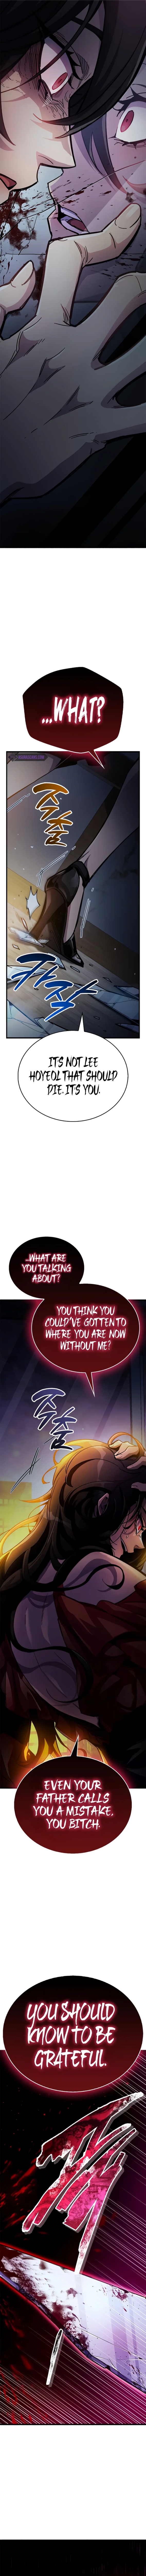 The Player Hides His Past - Chapter 38 Page 14